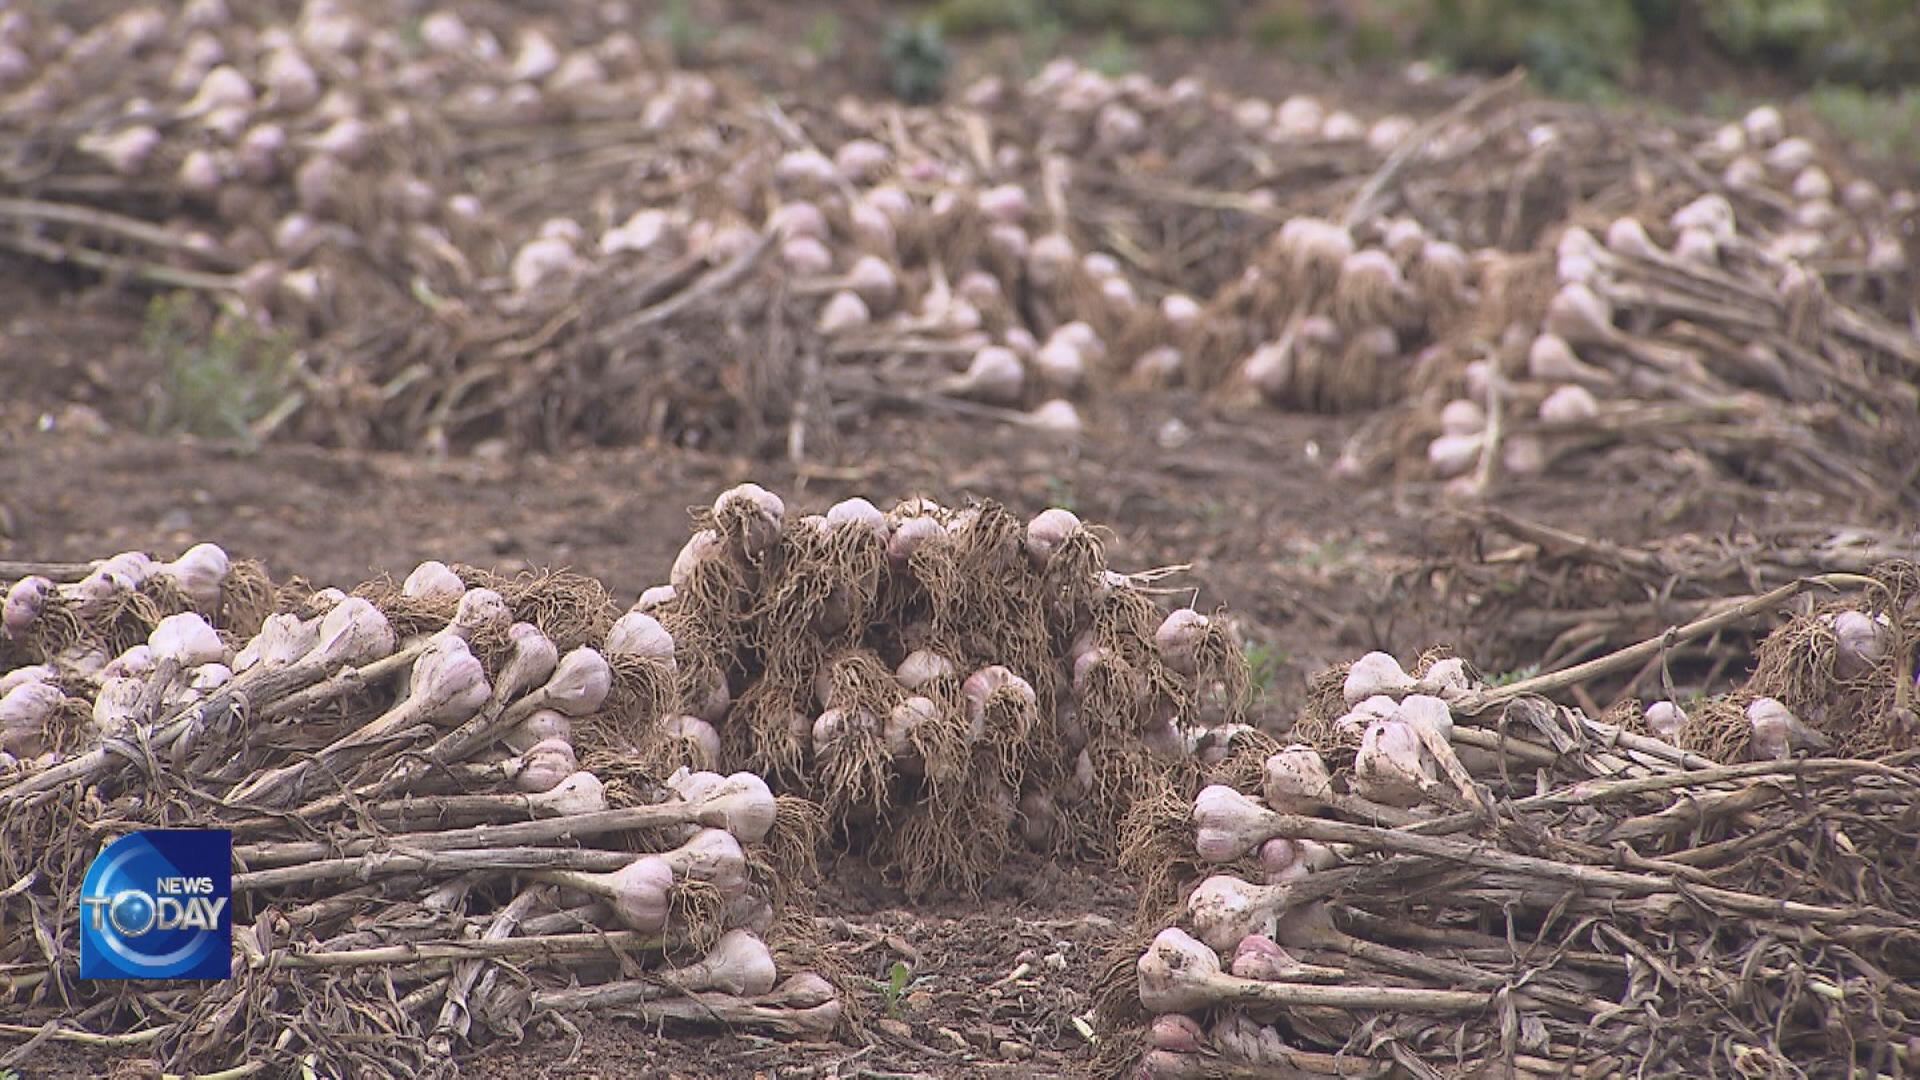 LISTING GARLIC AS AGRICULTURAL HERITAGE